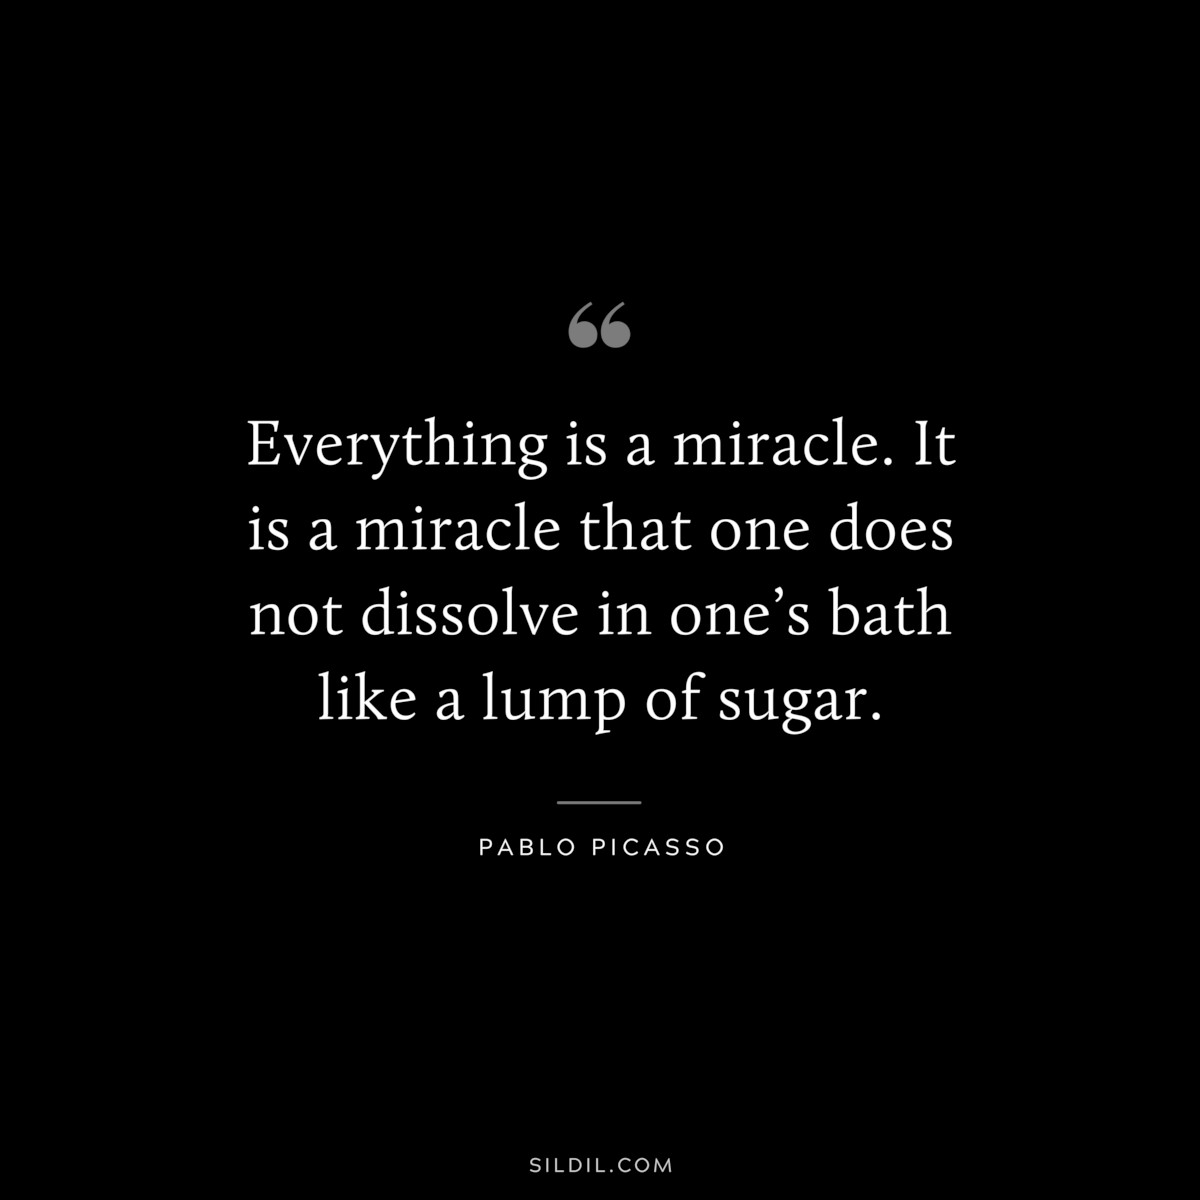 Everything is a miracle. It is a miracle that one does not dissolve in one’s bath like a lump of sugar. ― Pablo Picasso